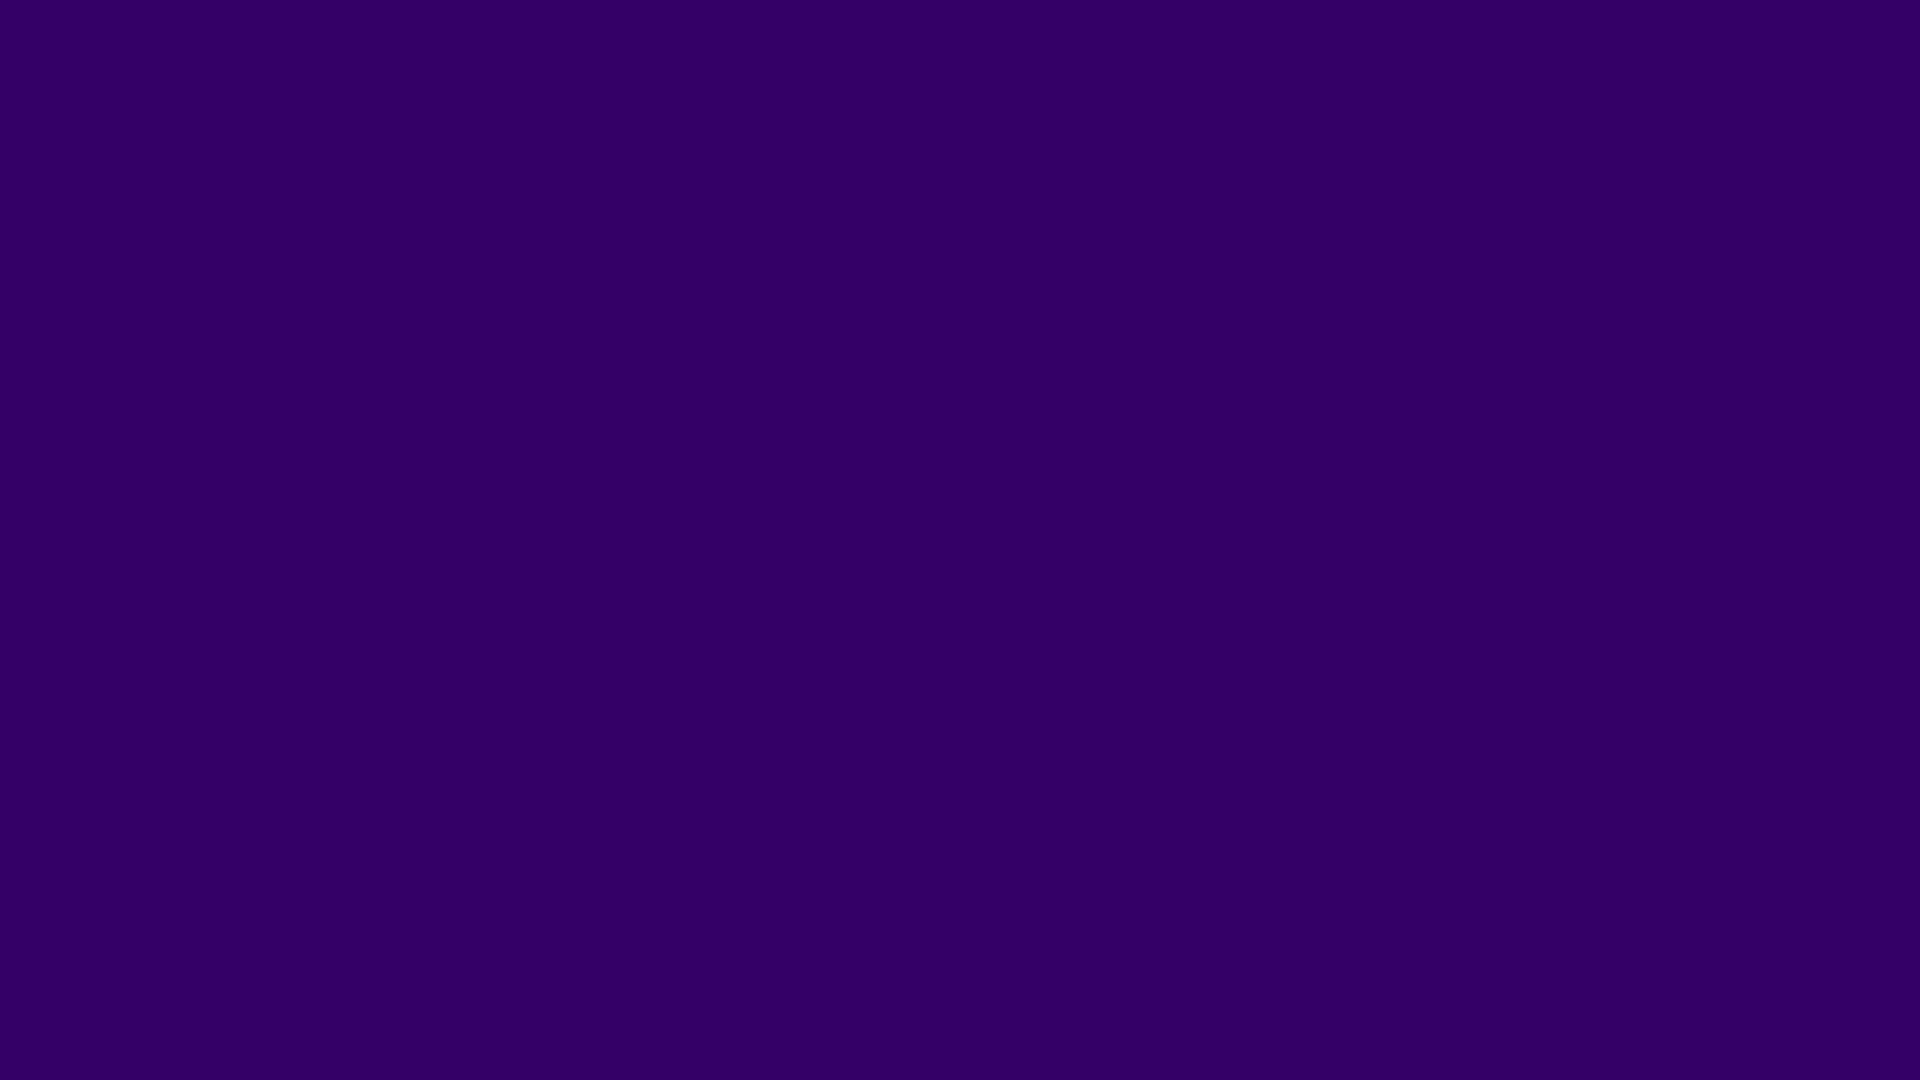 Djupt Mattviolett (for The Name Of The Color As A Wallpaper Option) Wallpaper